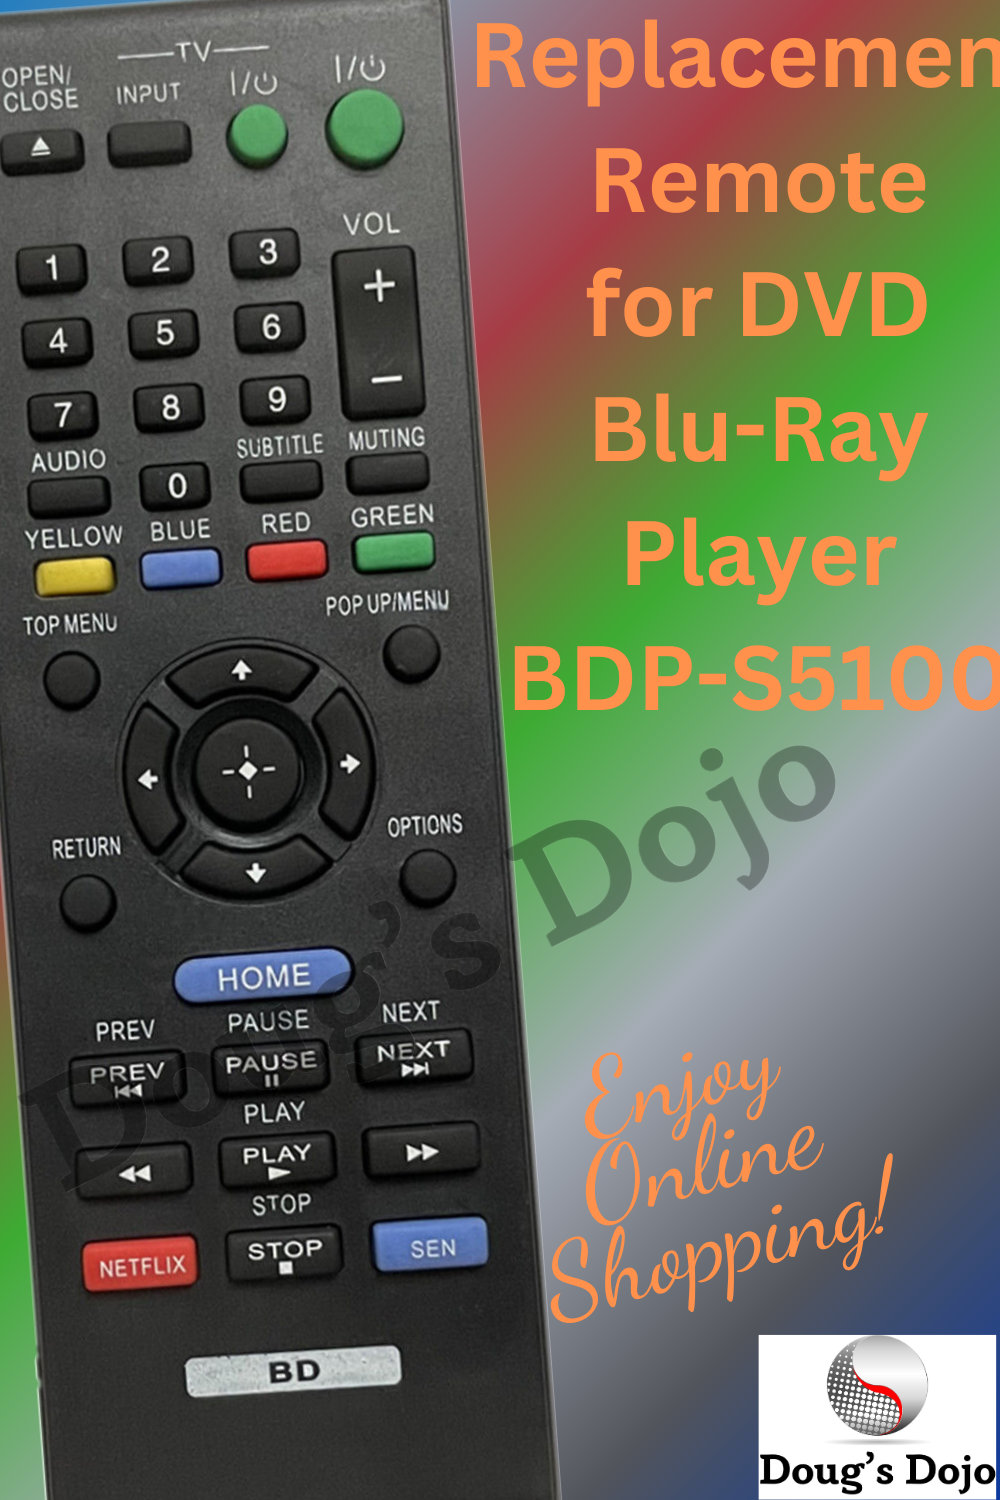 NEW Remote RMT-B115A For RMT-B119A Sony DVD Blu-Ray Player BDP-S5100